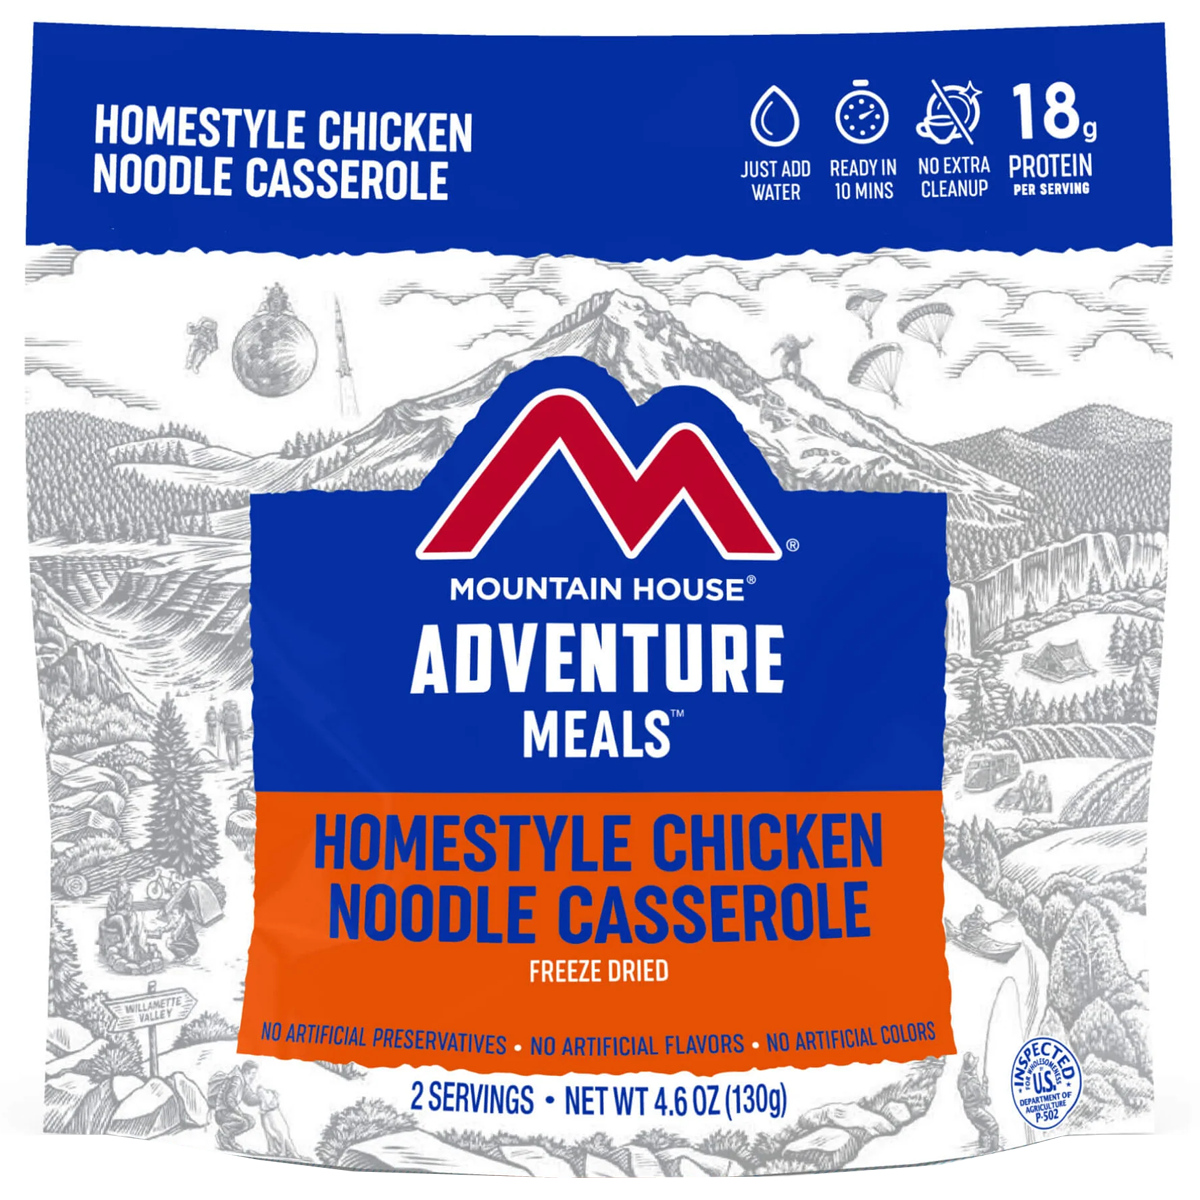 Homestyle Chicken Noodle Casserole (2 Servings) alternate view